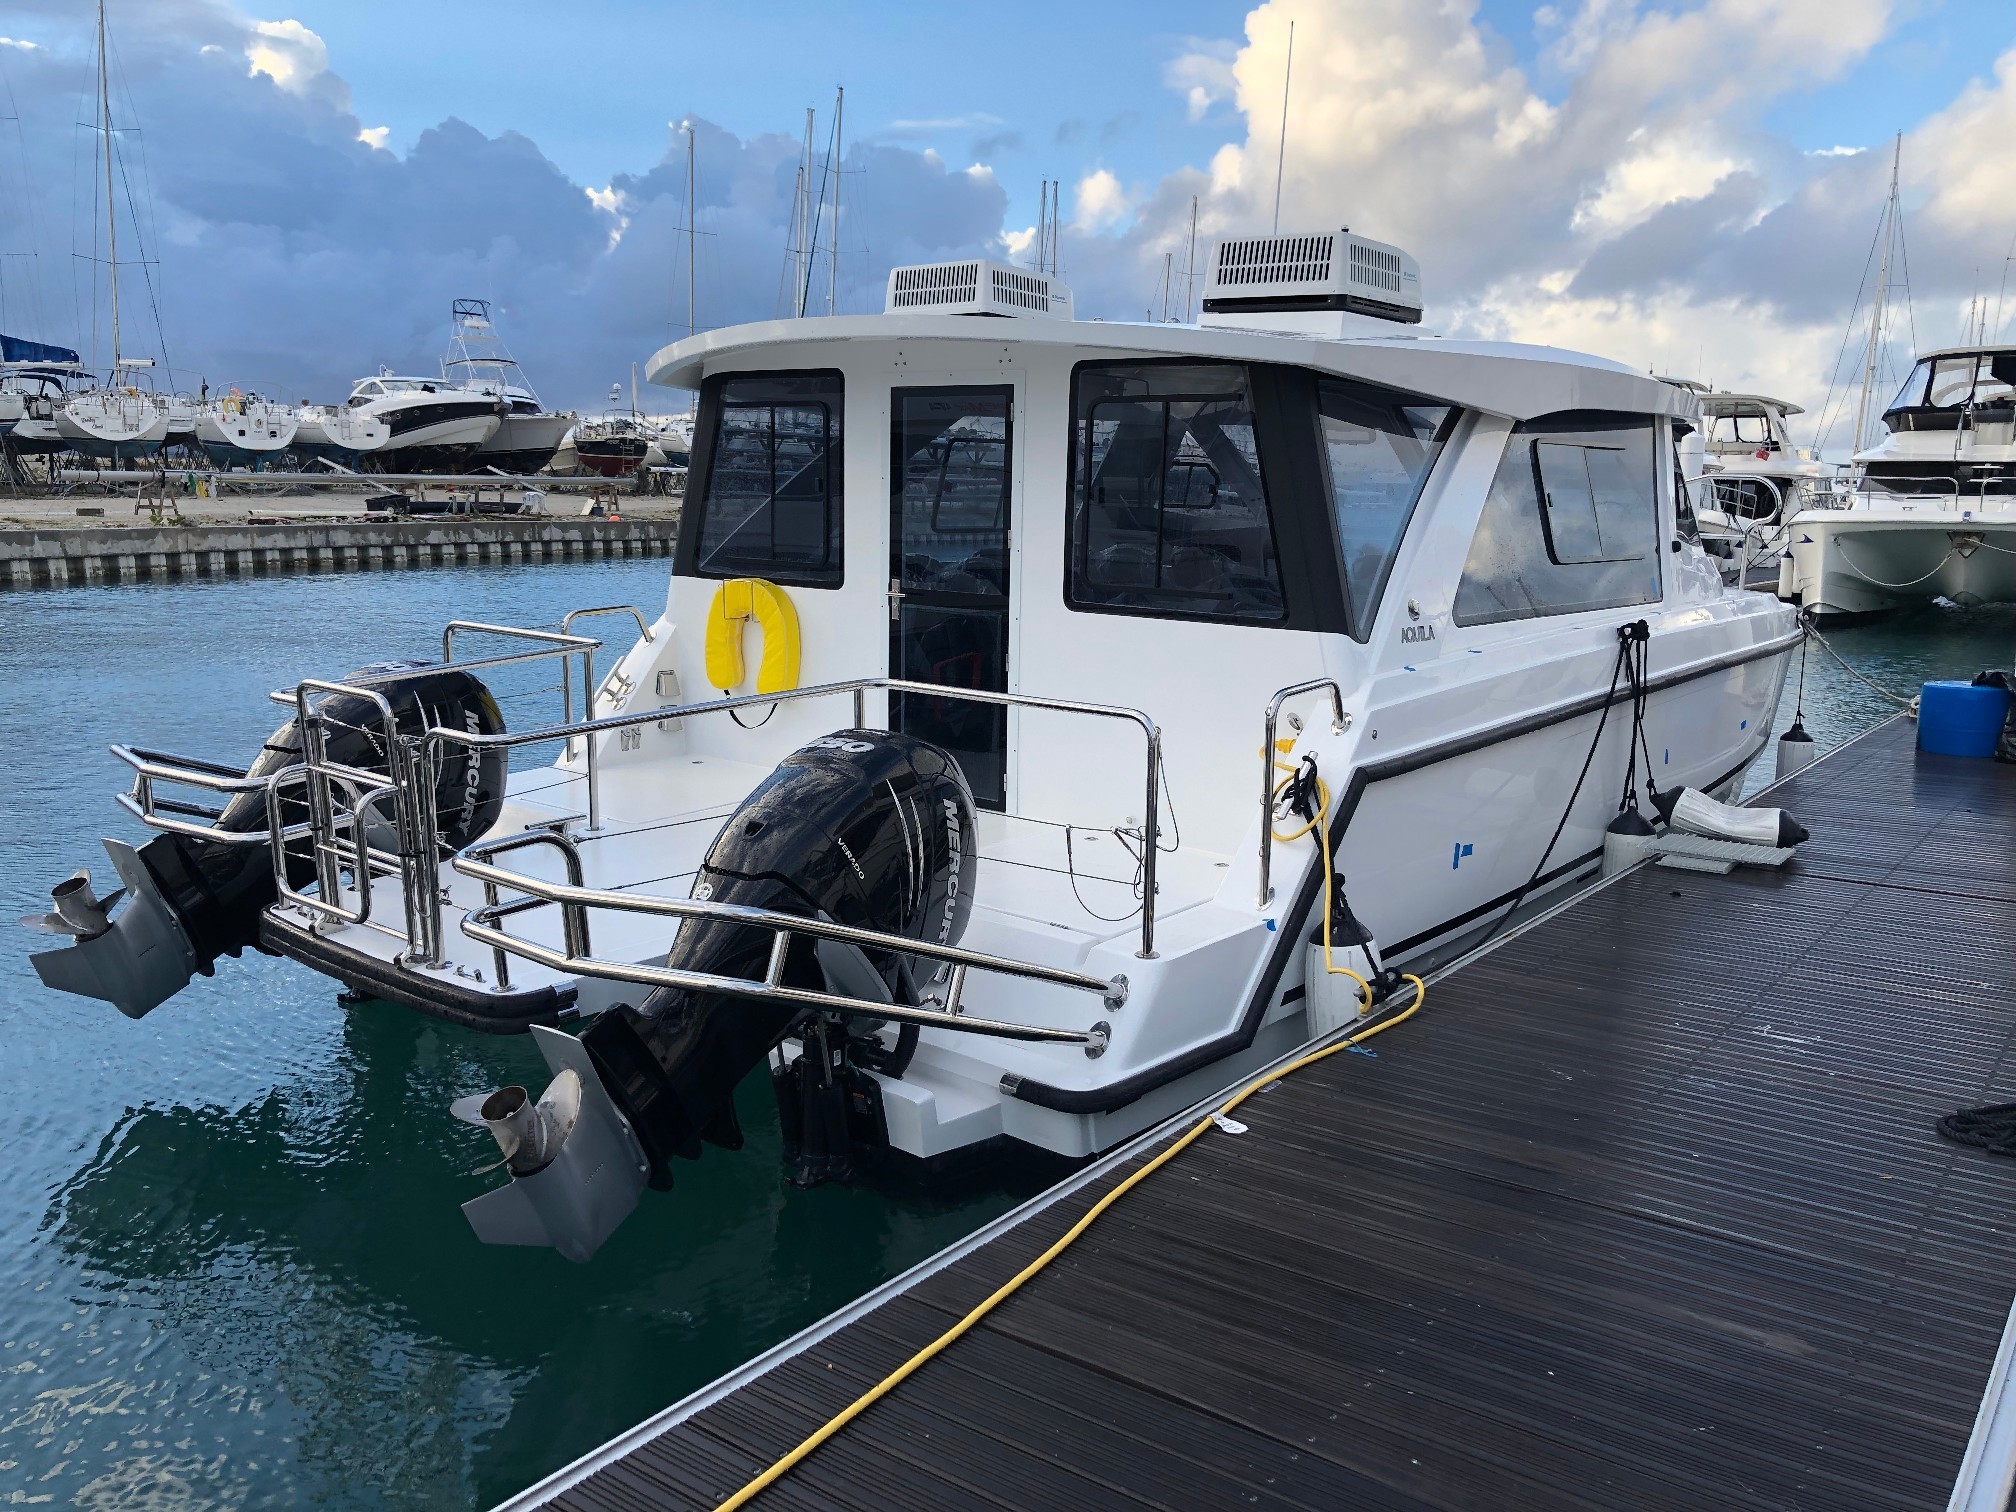 New Power Catamaran for Sale 2020 AQUILA 36 EXCURSION Boat Highlights